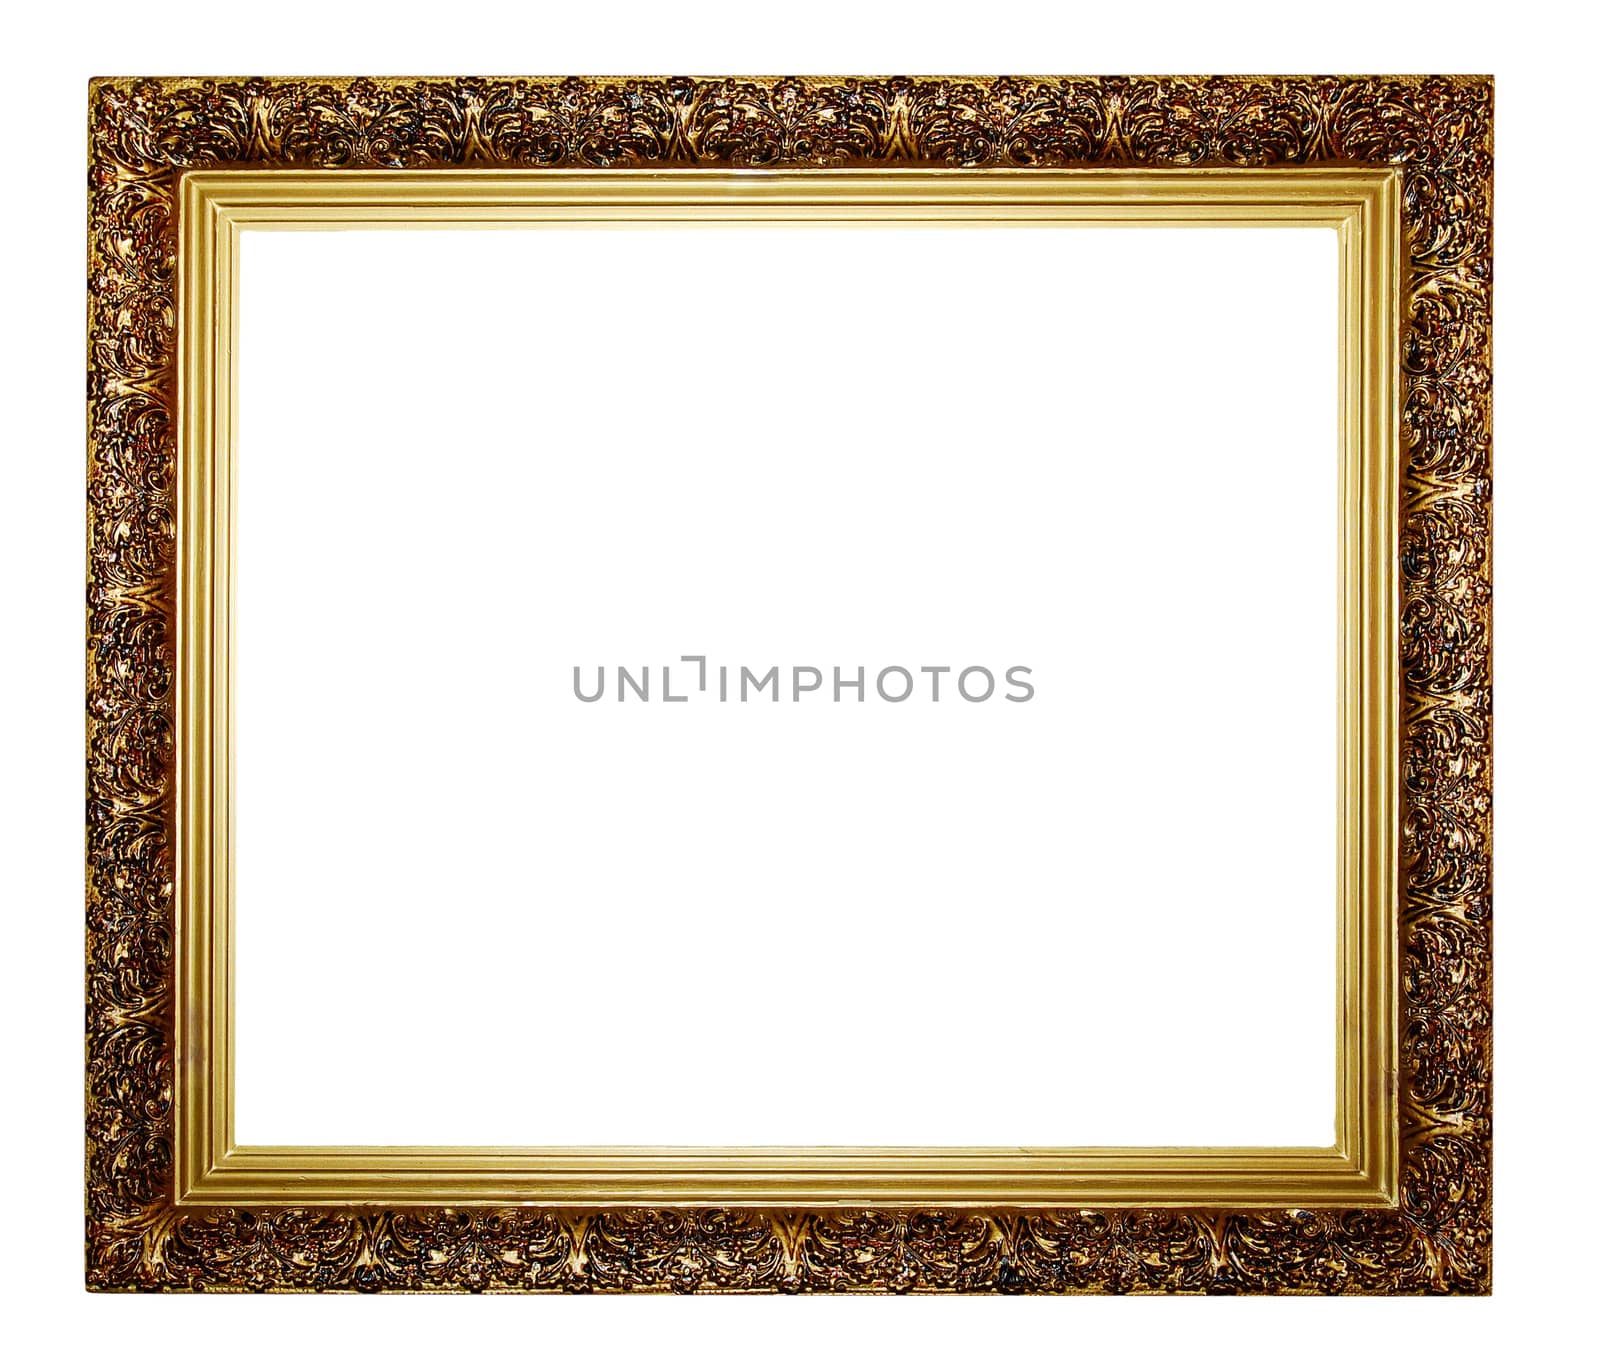 Antique golden wood frame including clipping path